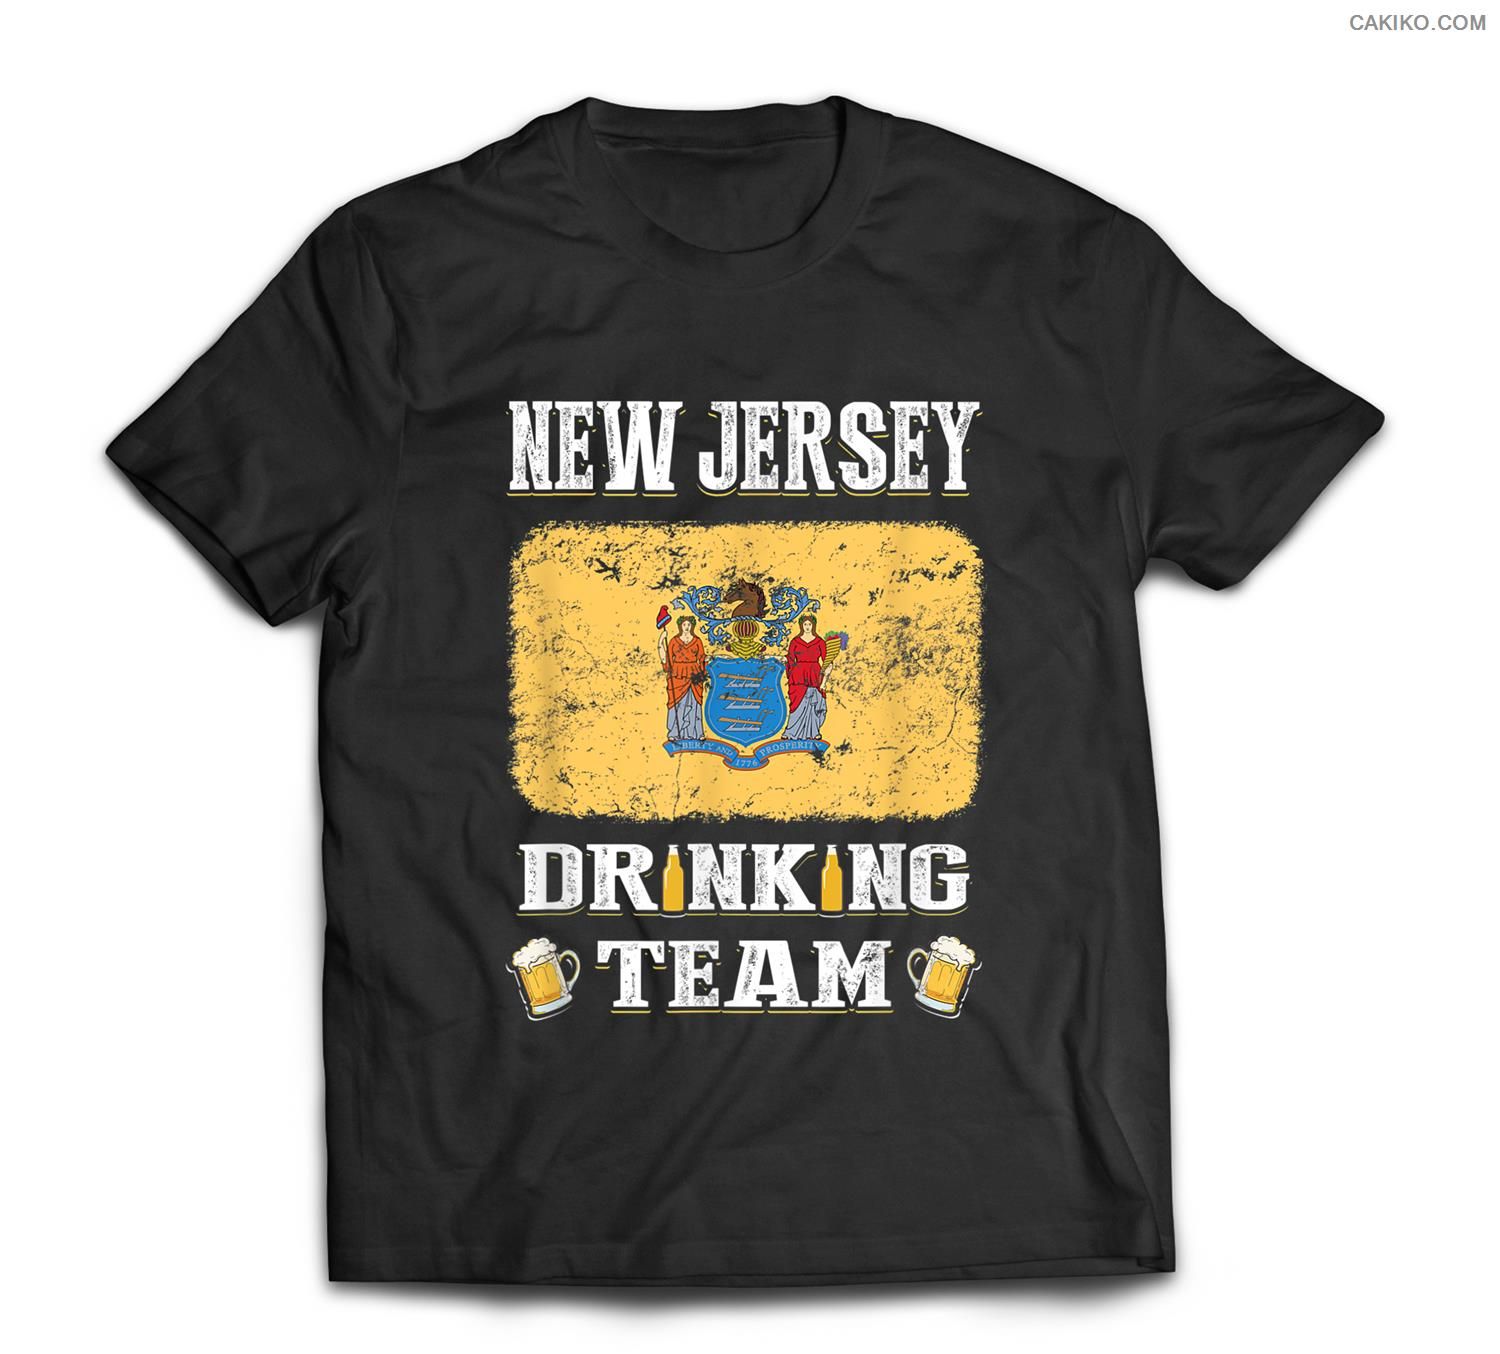 New Jersey Drinking Team Funny Beer T-Shirt